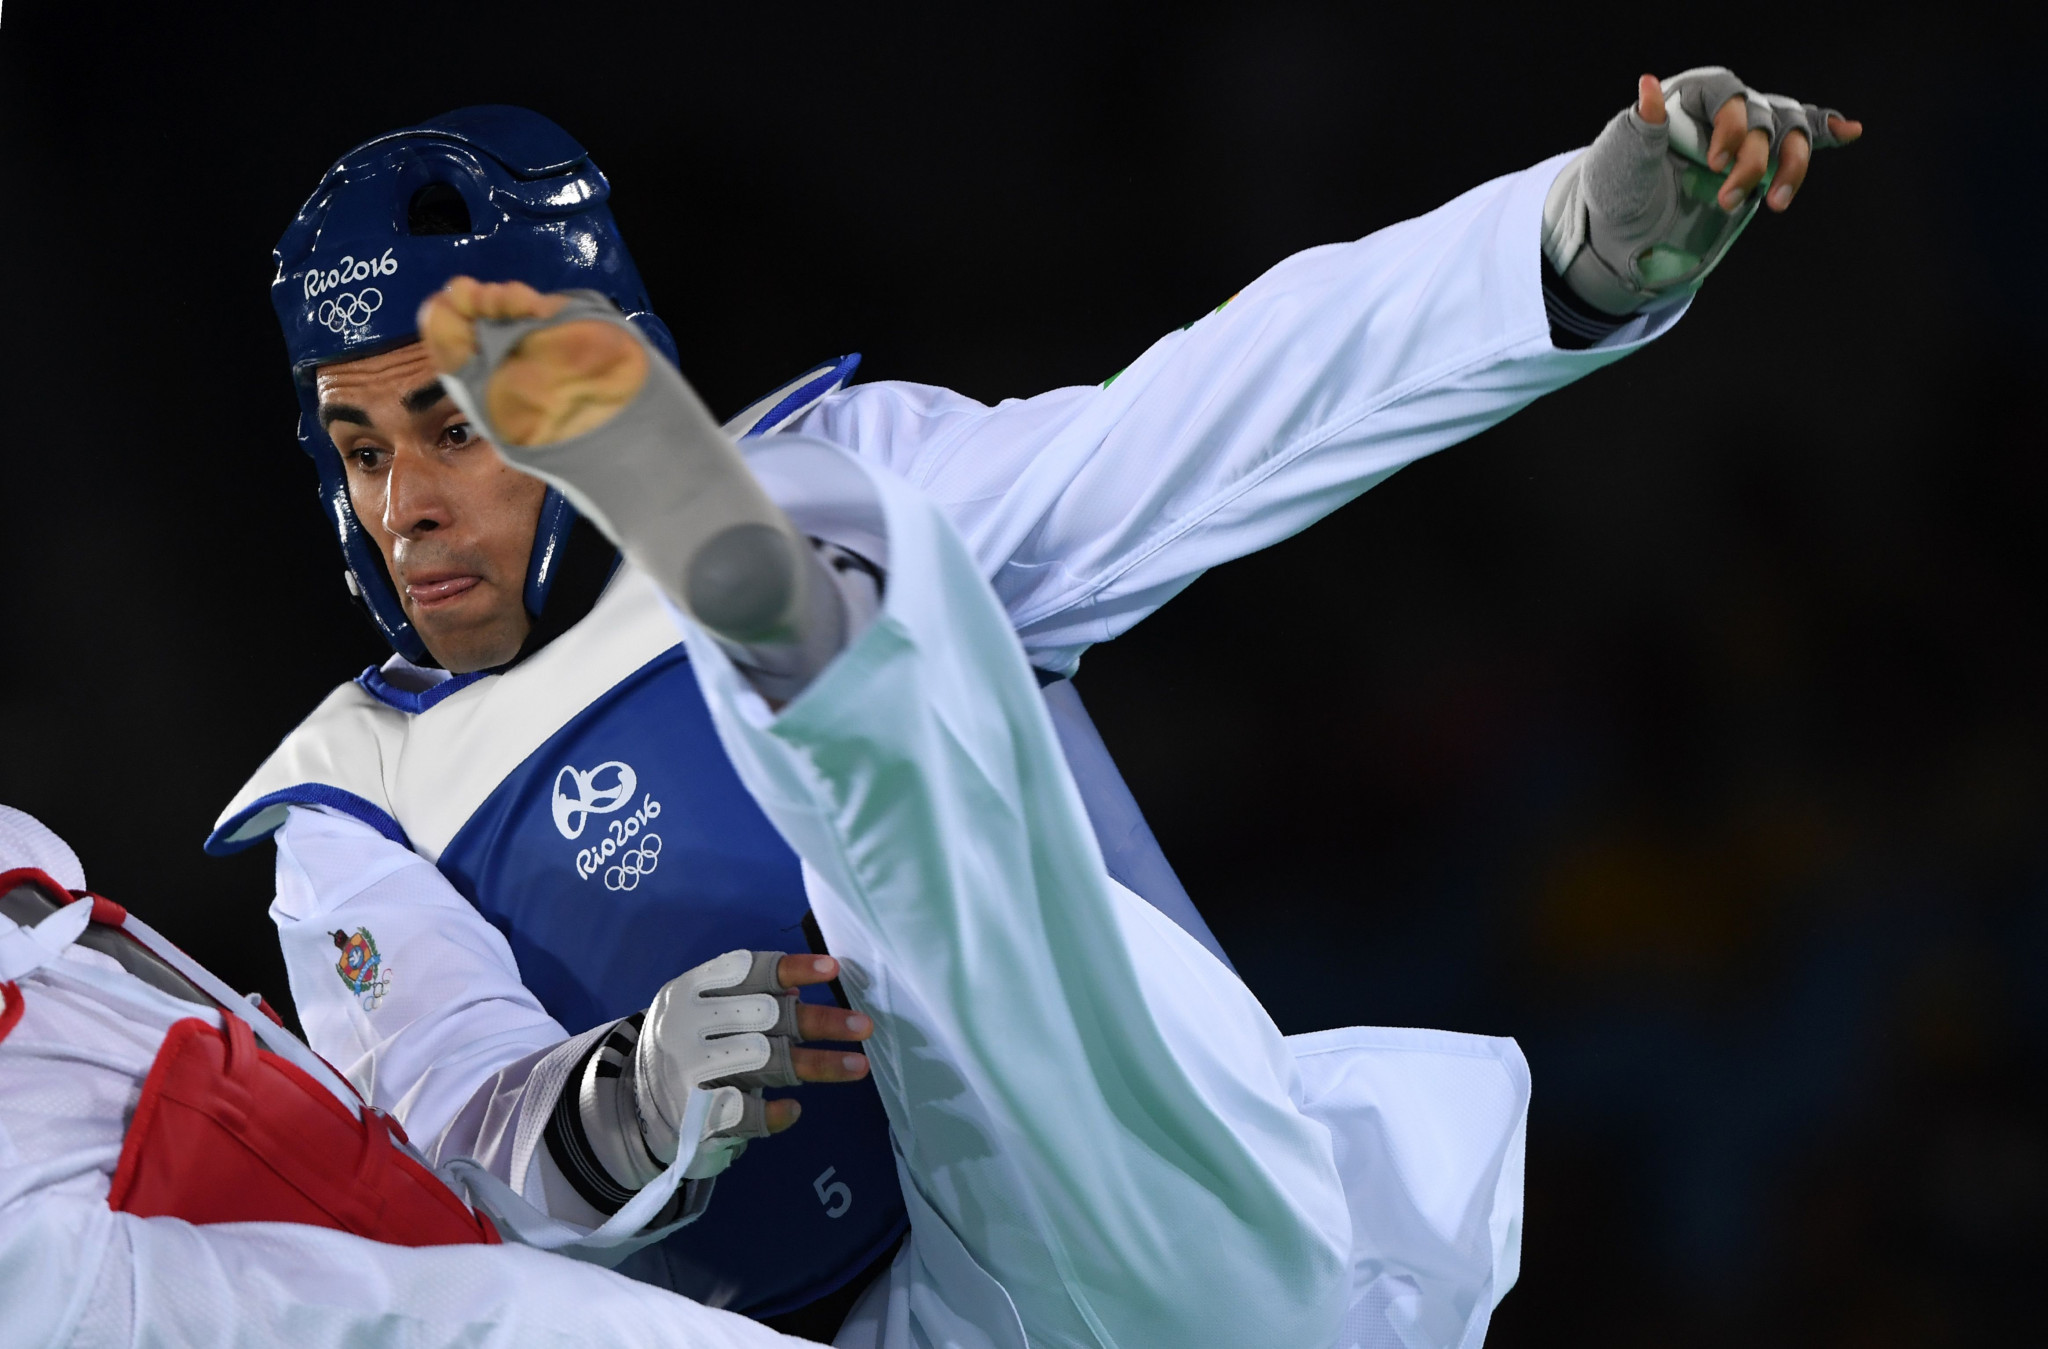 Two-time Taekwondo World Championships medallist Sajjad Mardani of Iran may miss the Olympic Games in Paris ©Getty Images